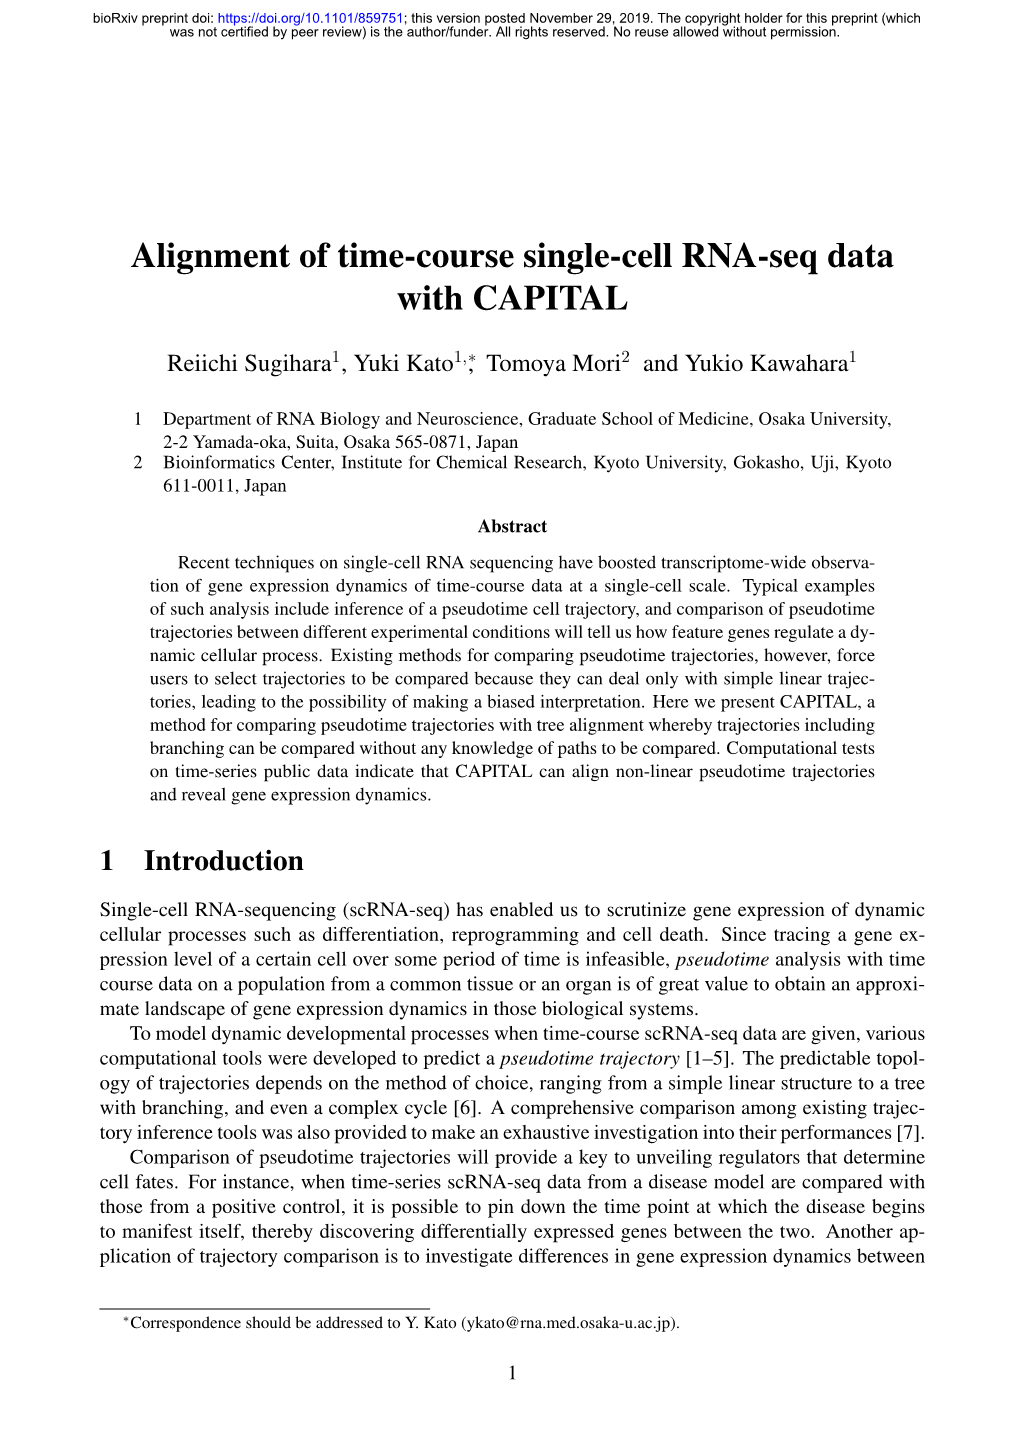 Alignment of Time-Course Single-Cell RNA-Seq Data with CAPITAL